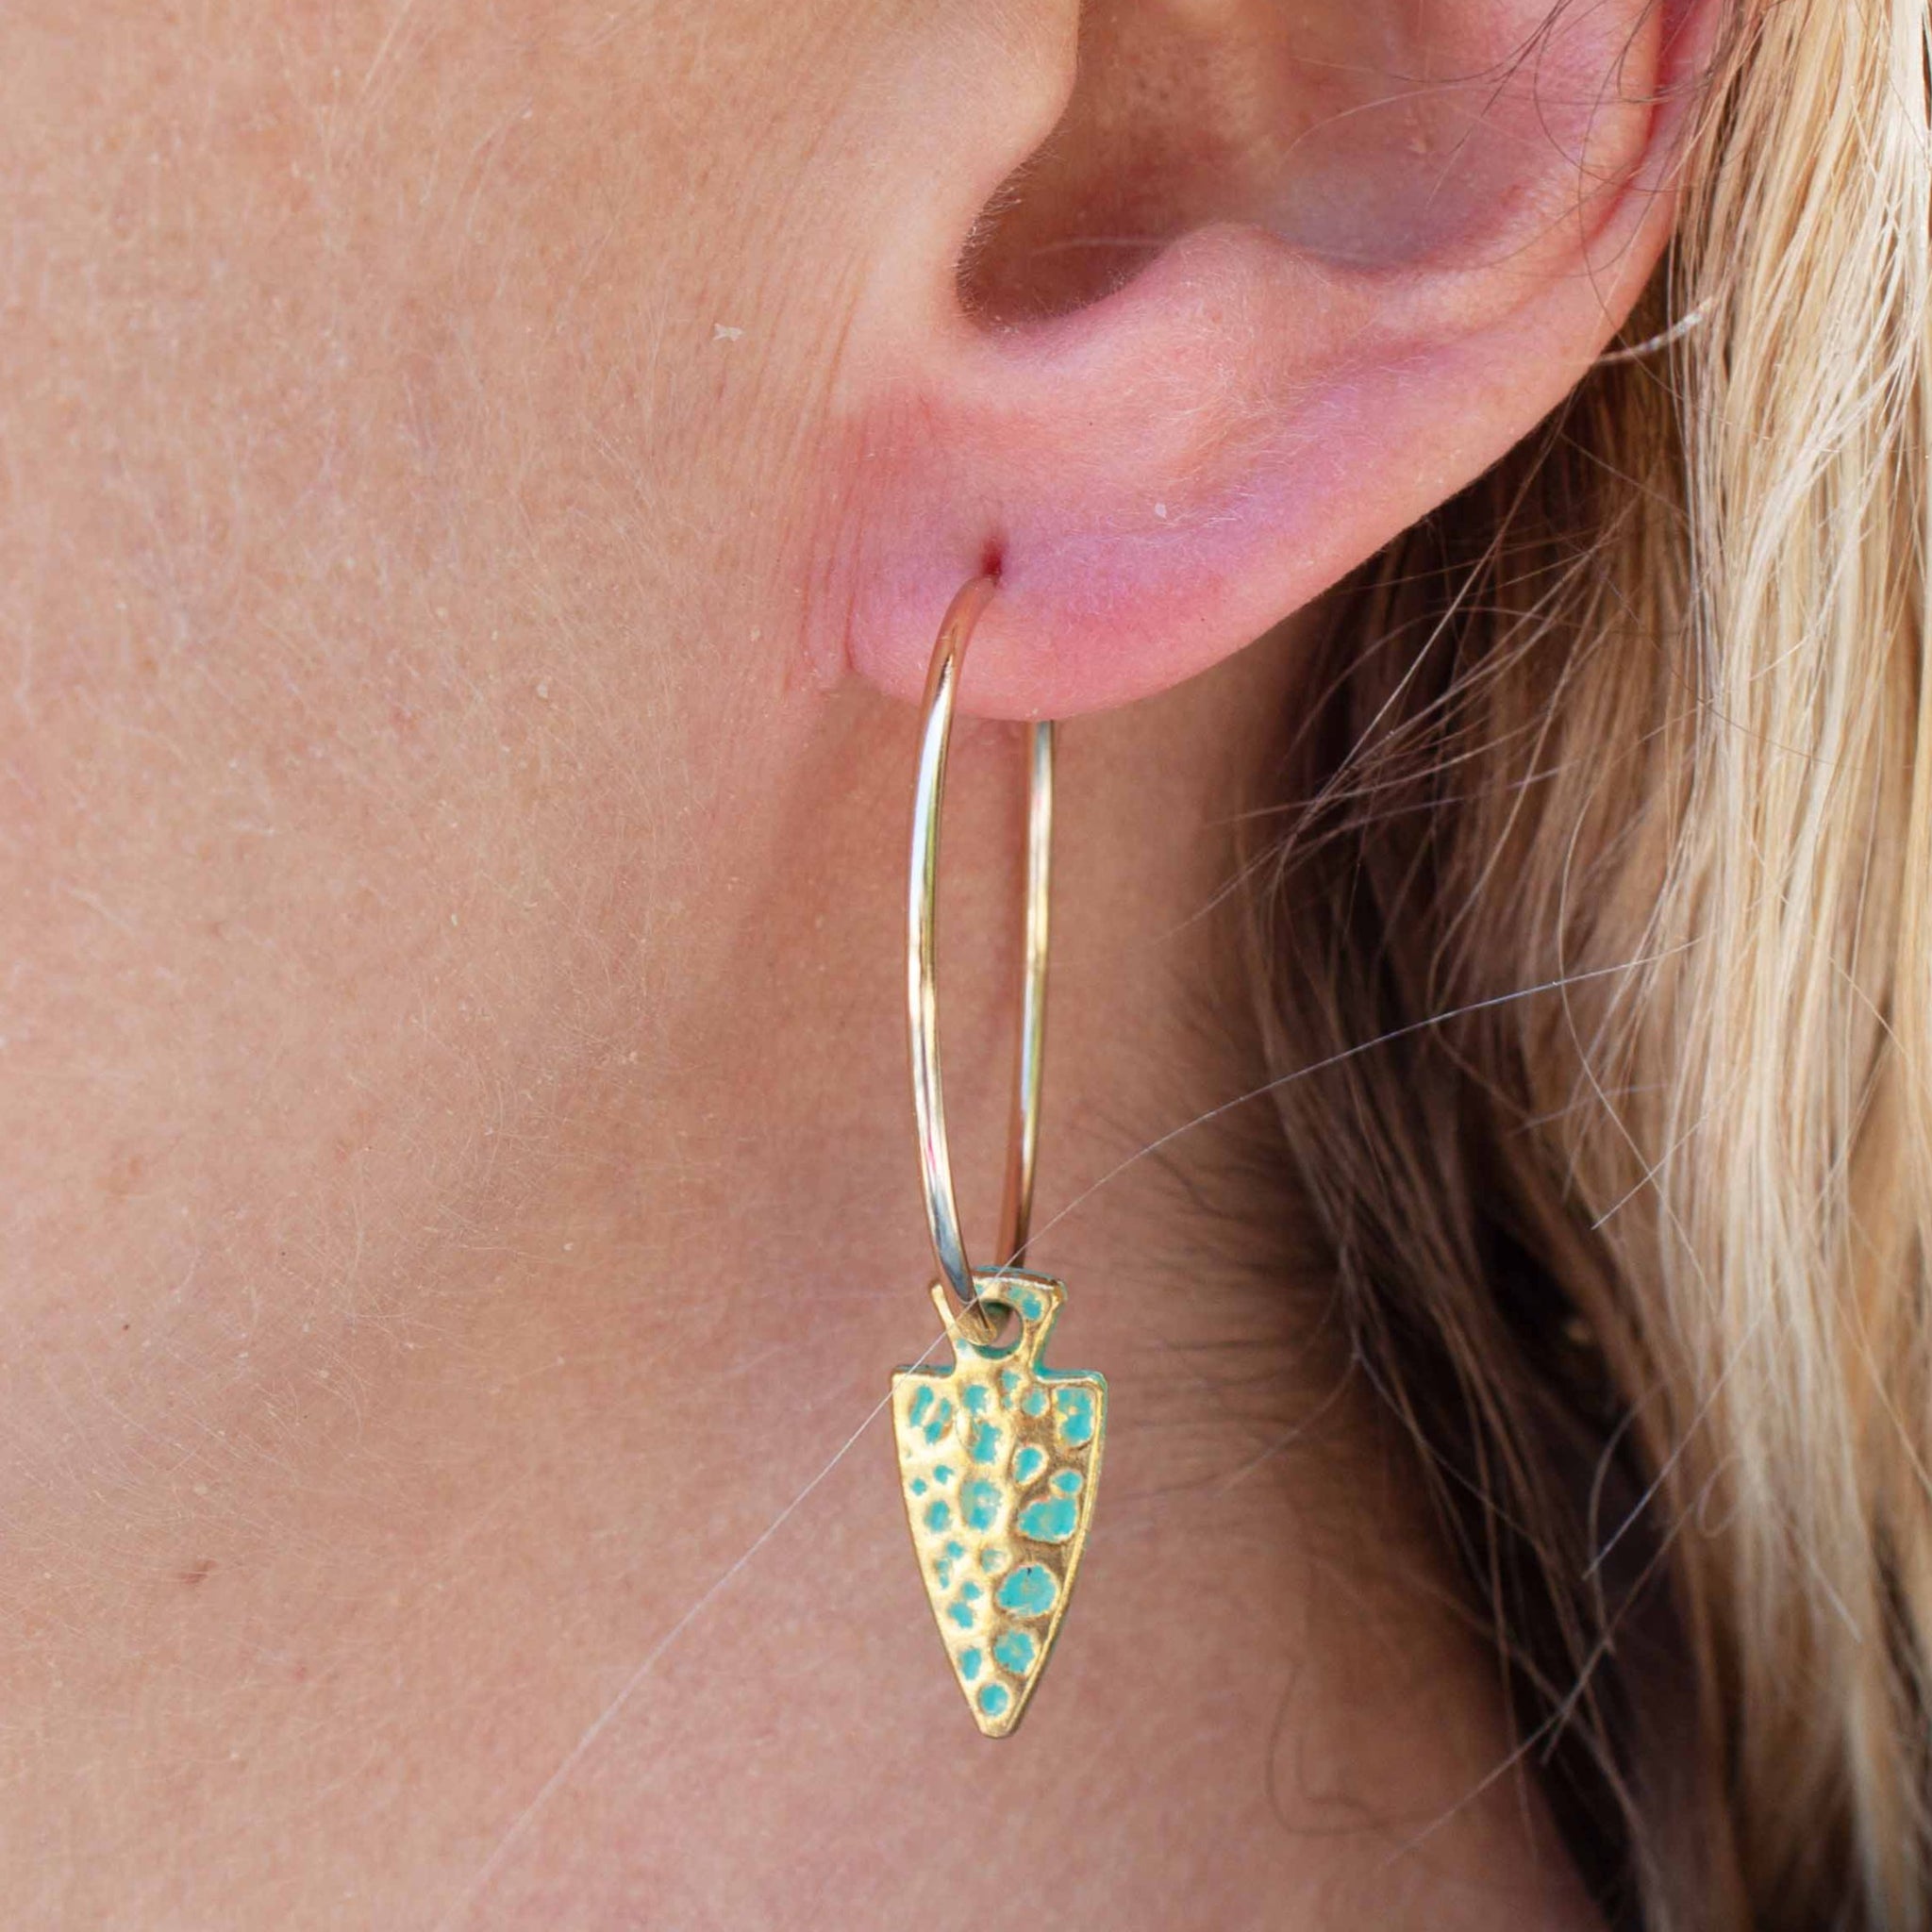 Get ready for battle in these turquoise and gold beauties!  40mm gold filled hoop earrings with vintage arrow head charms. Made in Toronto kp jewelry co.